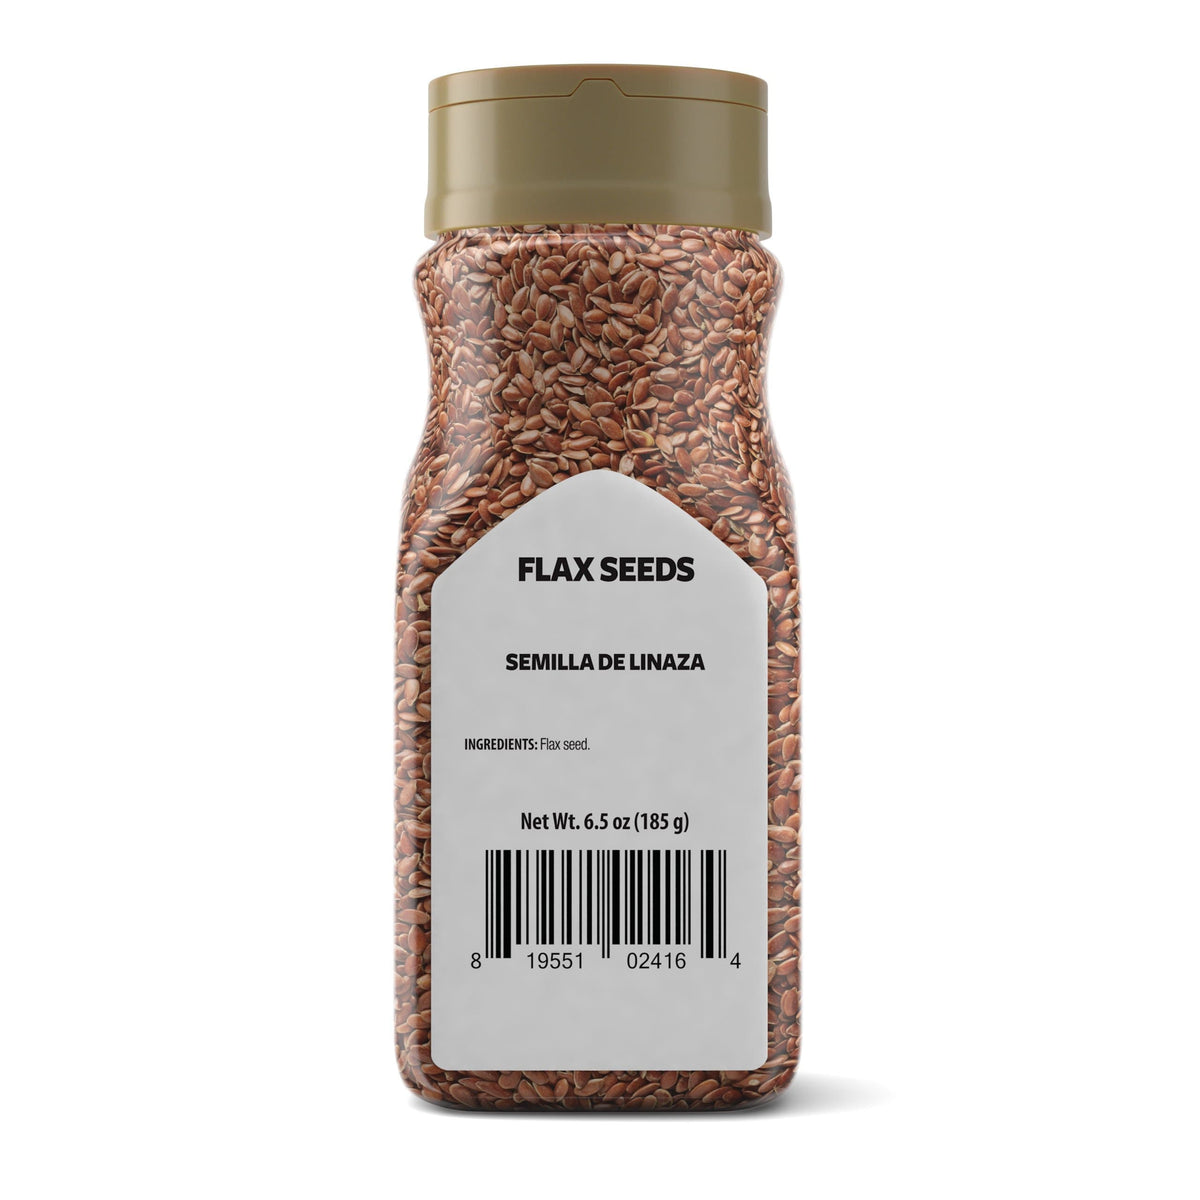 How You Can Benefit from the Superpower of Flax Seeds